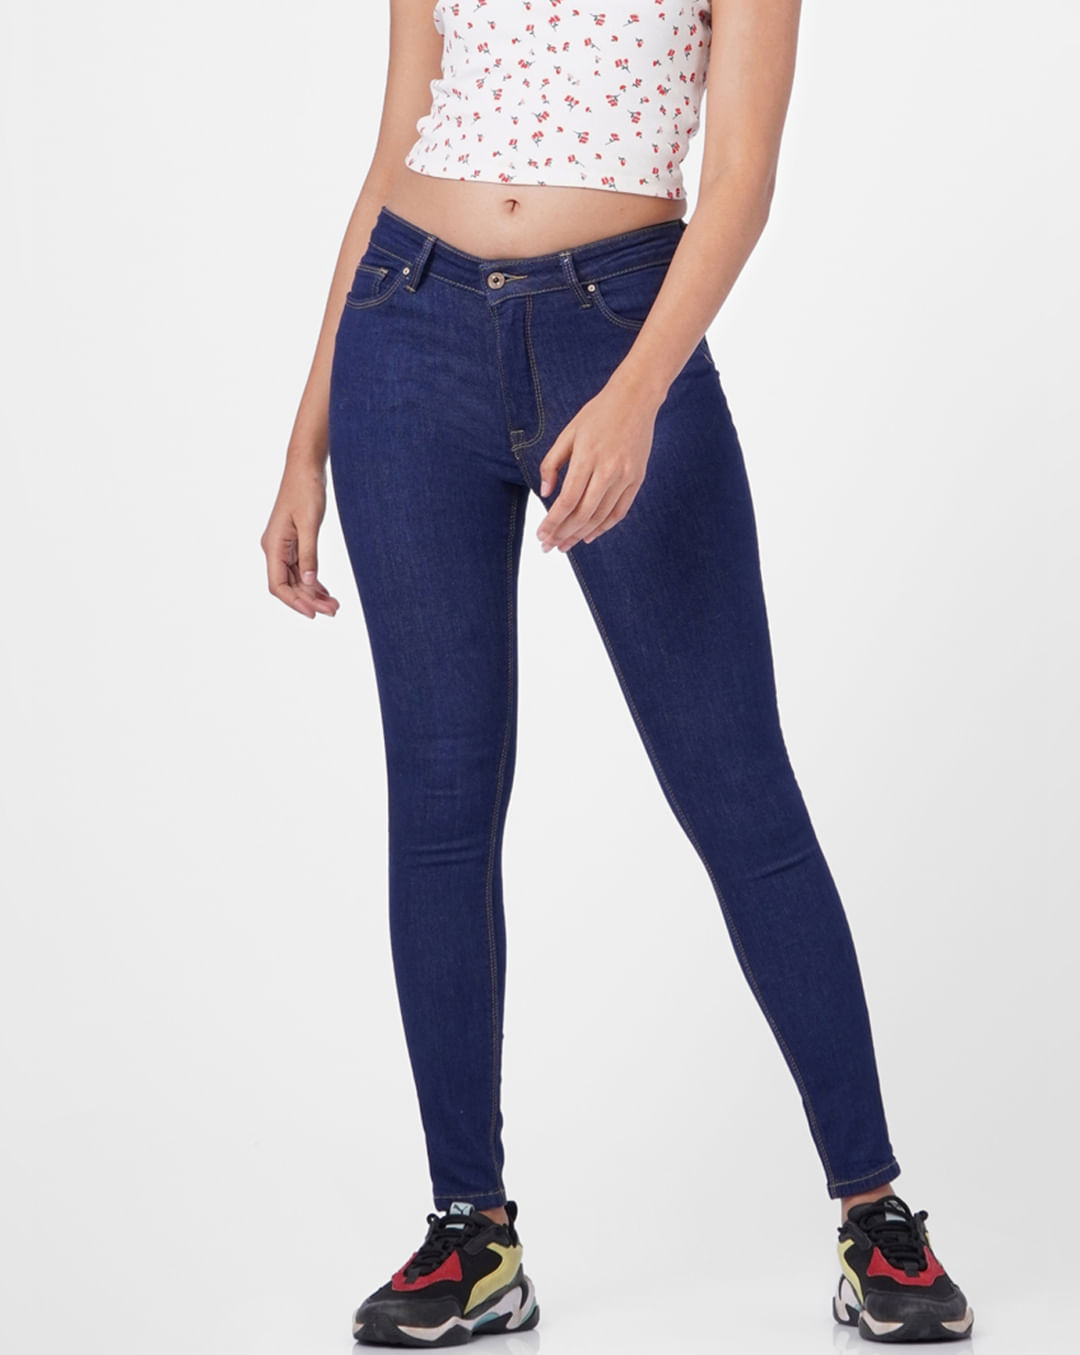 Blue Mid Rise Distressed Skinny Jeans For Women